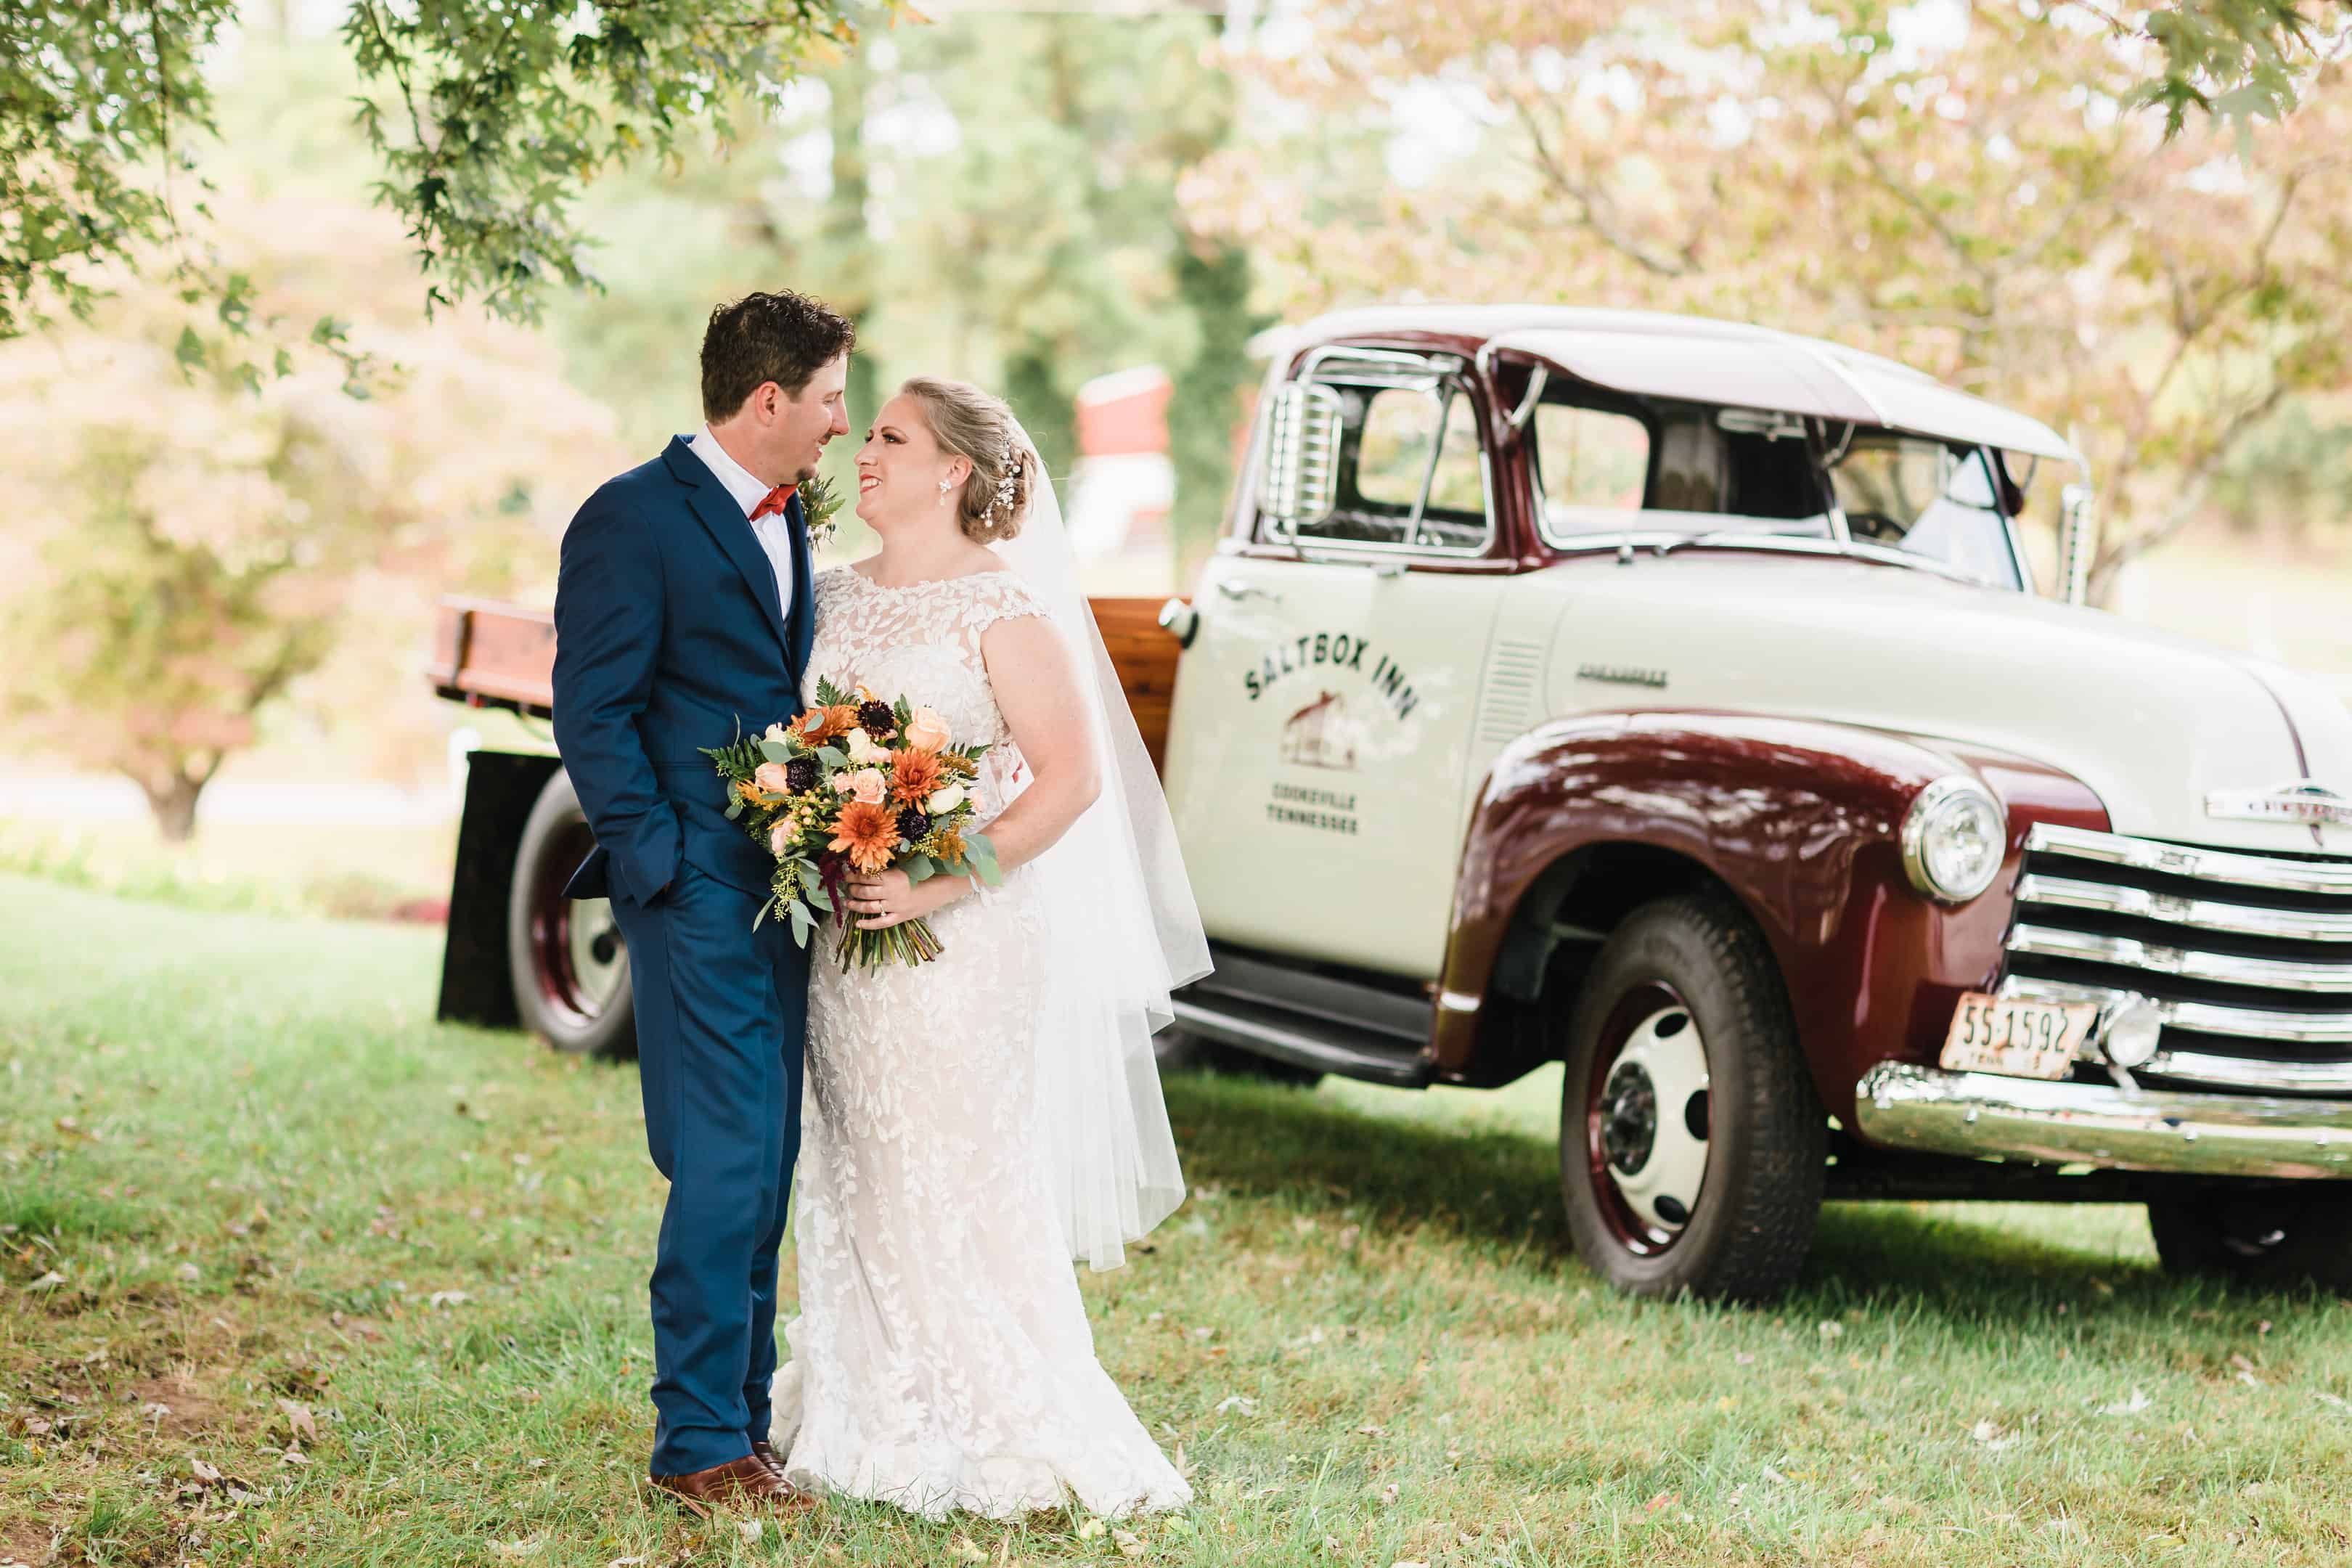 Shauna & Todd - Fabulous Fall Wedding at the Saltbox in Cookeville, Tennessee